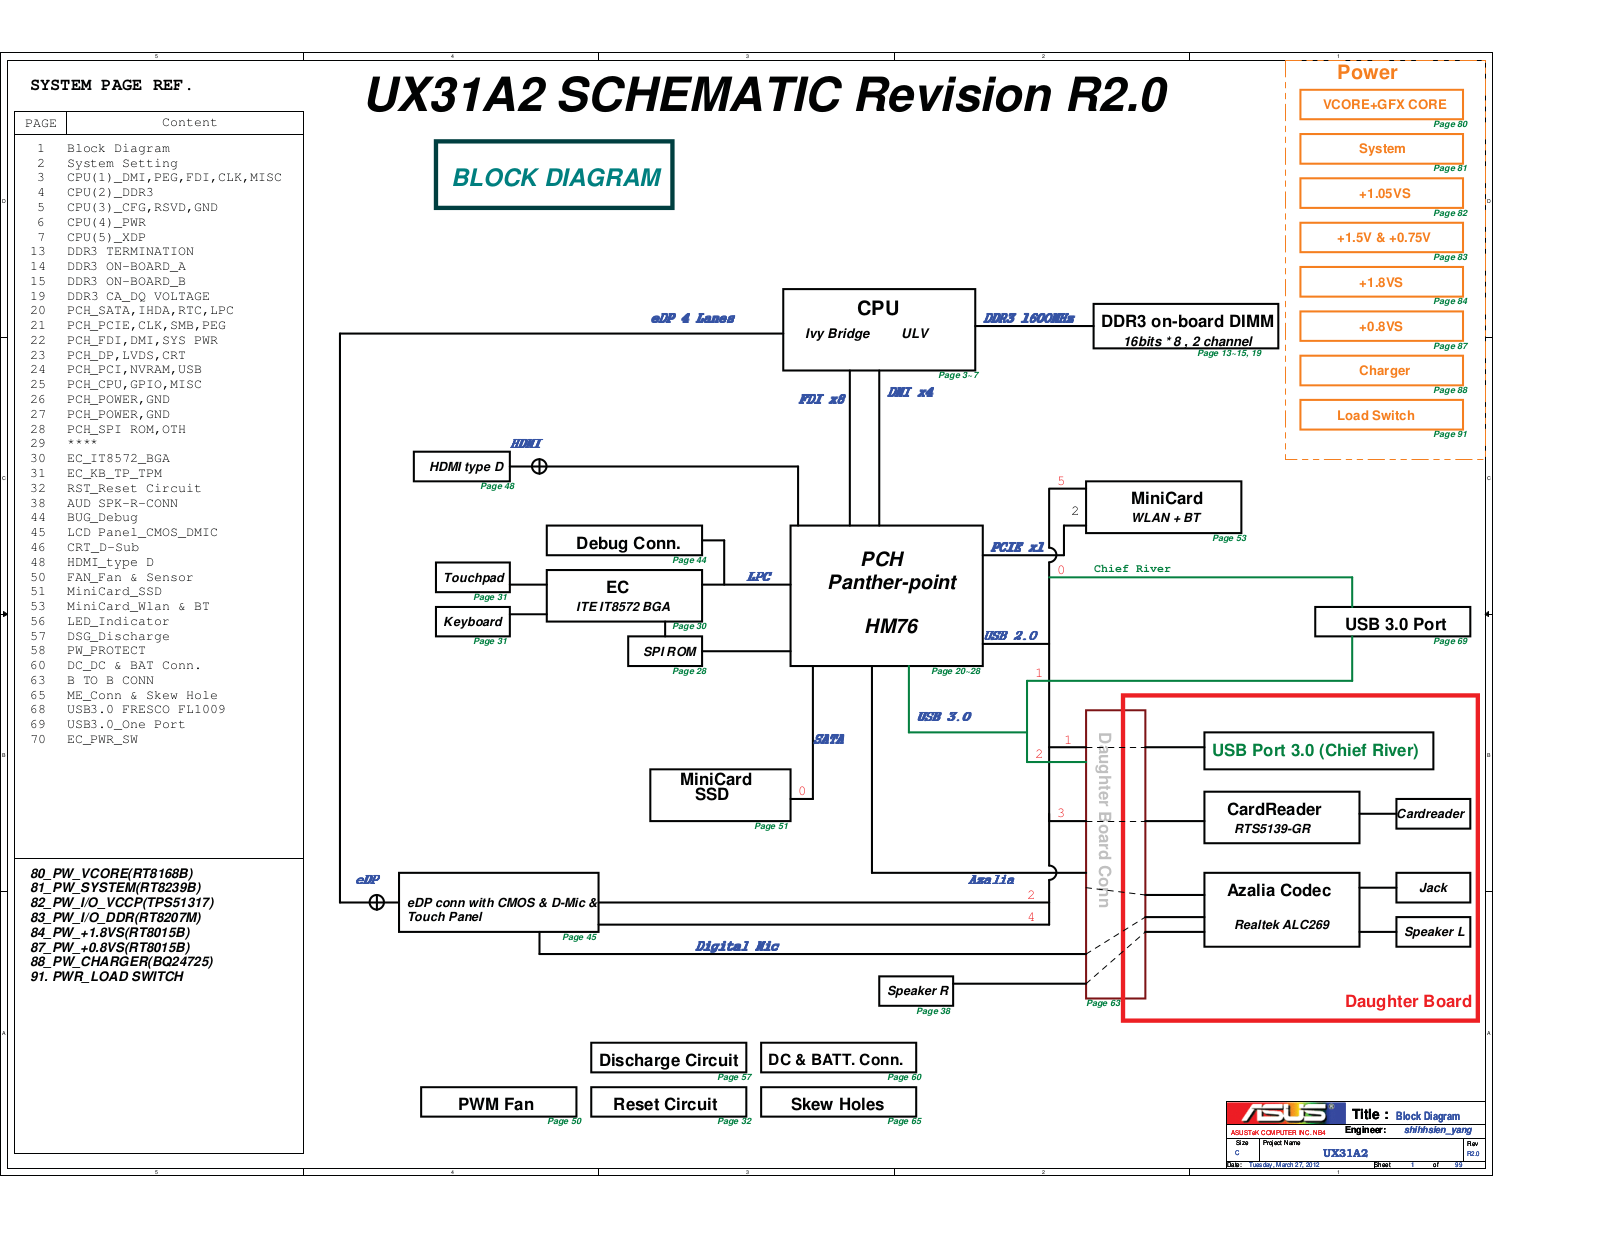 Asus UX31A2 Schematic